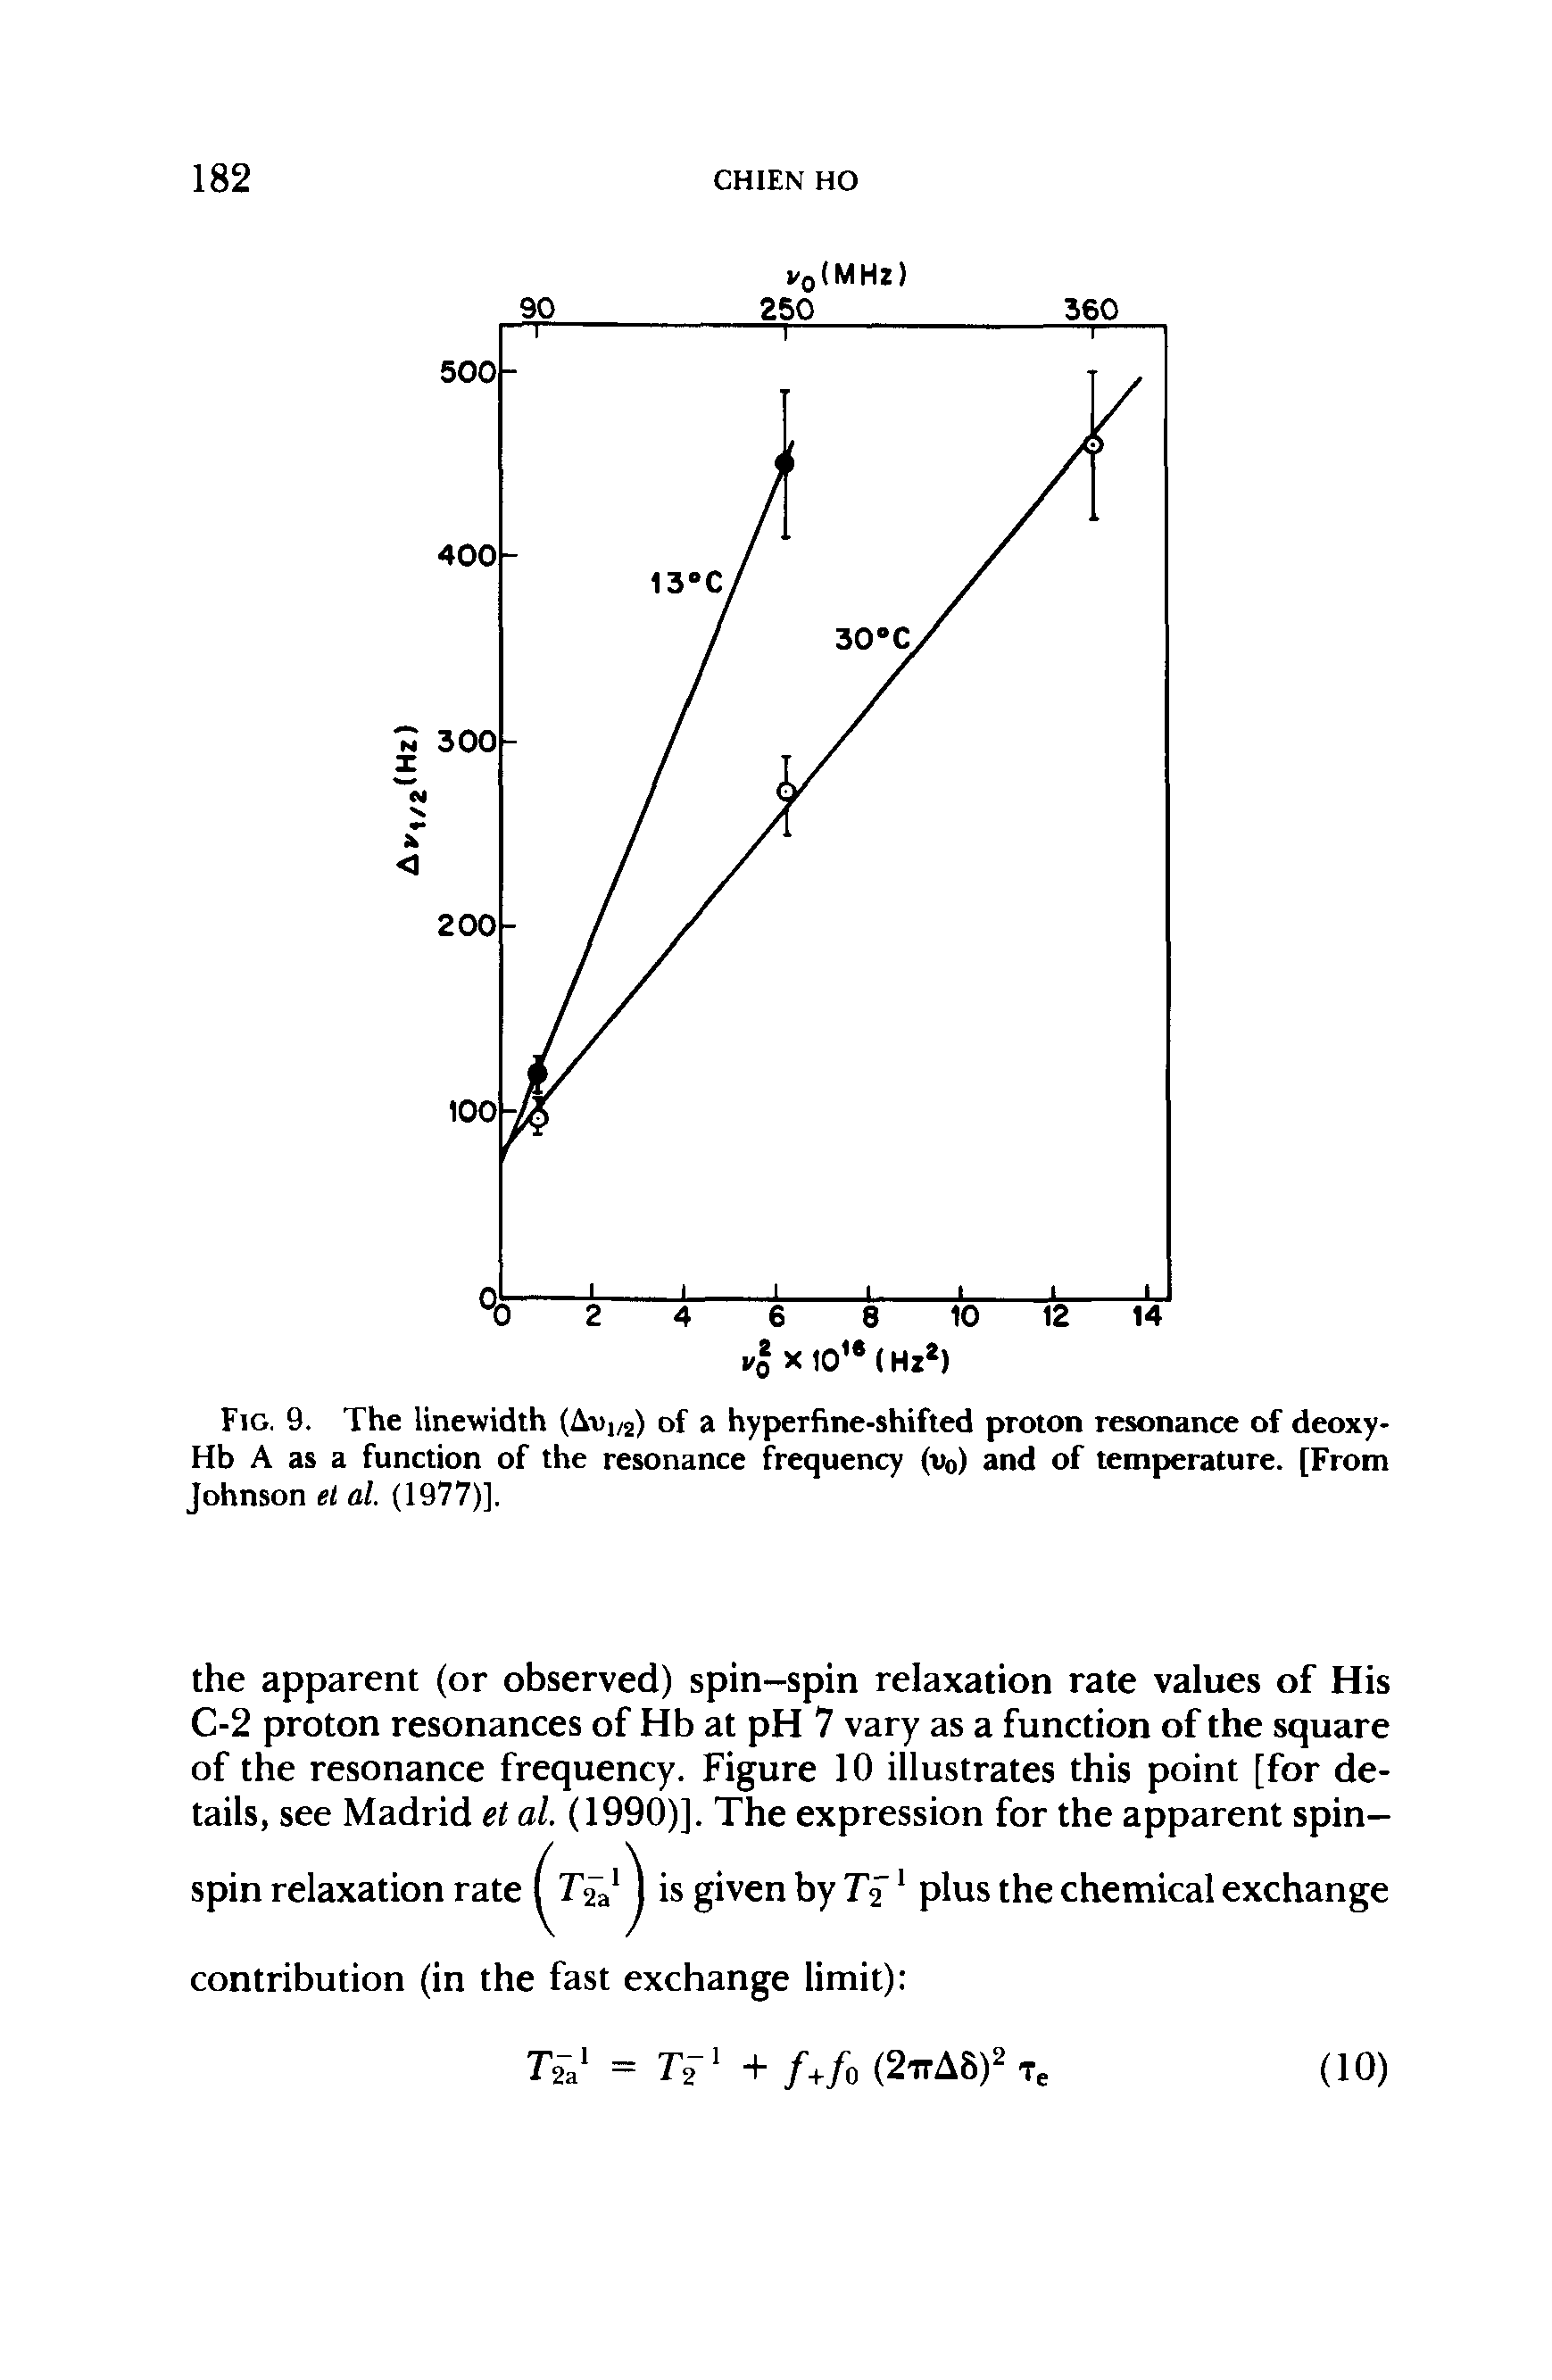 Fig. 9. The linewidth (Av1/2) of a hyperfine-shifted proton resonance of deoxy-Hb A as a function of the resonance frequency (t>o) and of temperature. [From Johnson el al. (1977)].